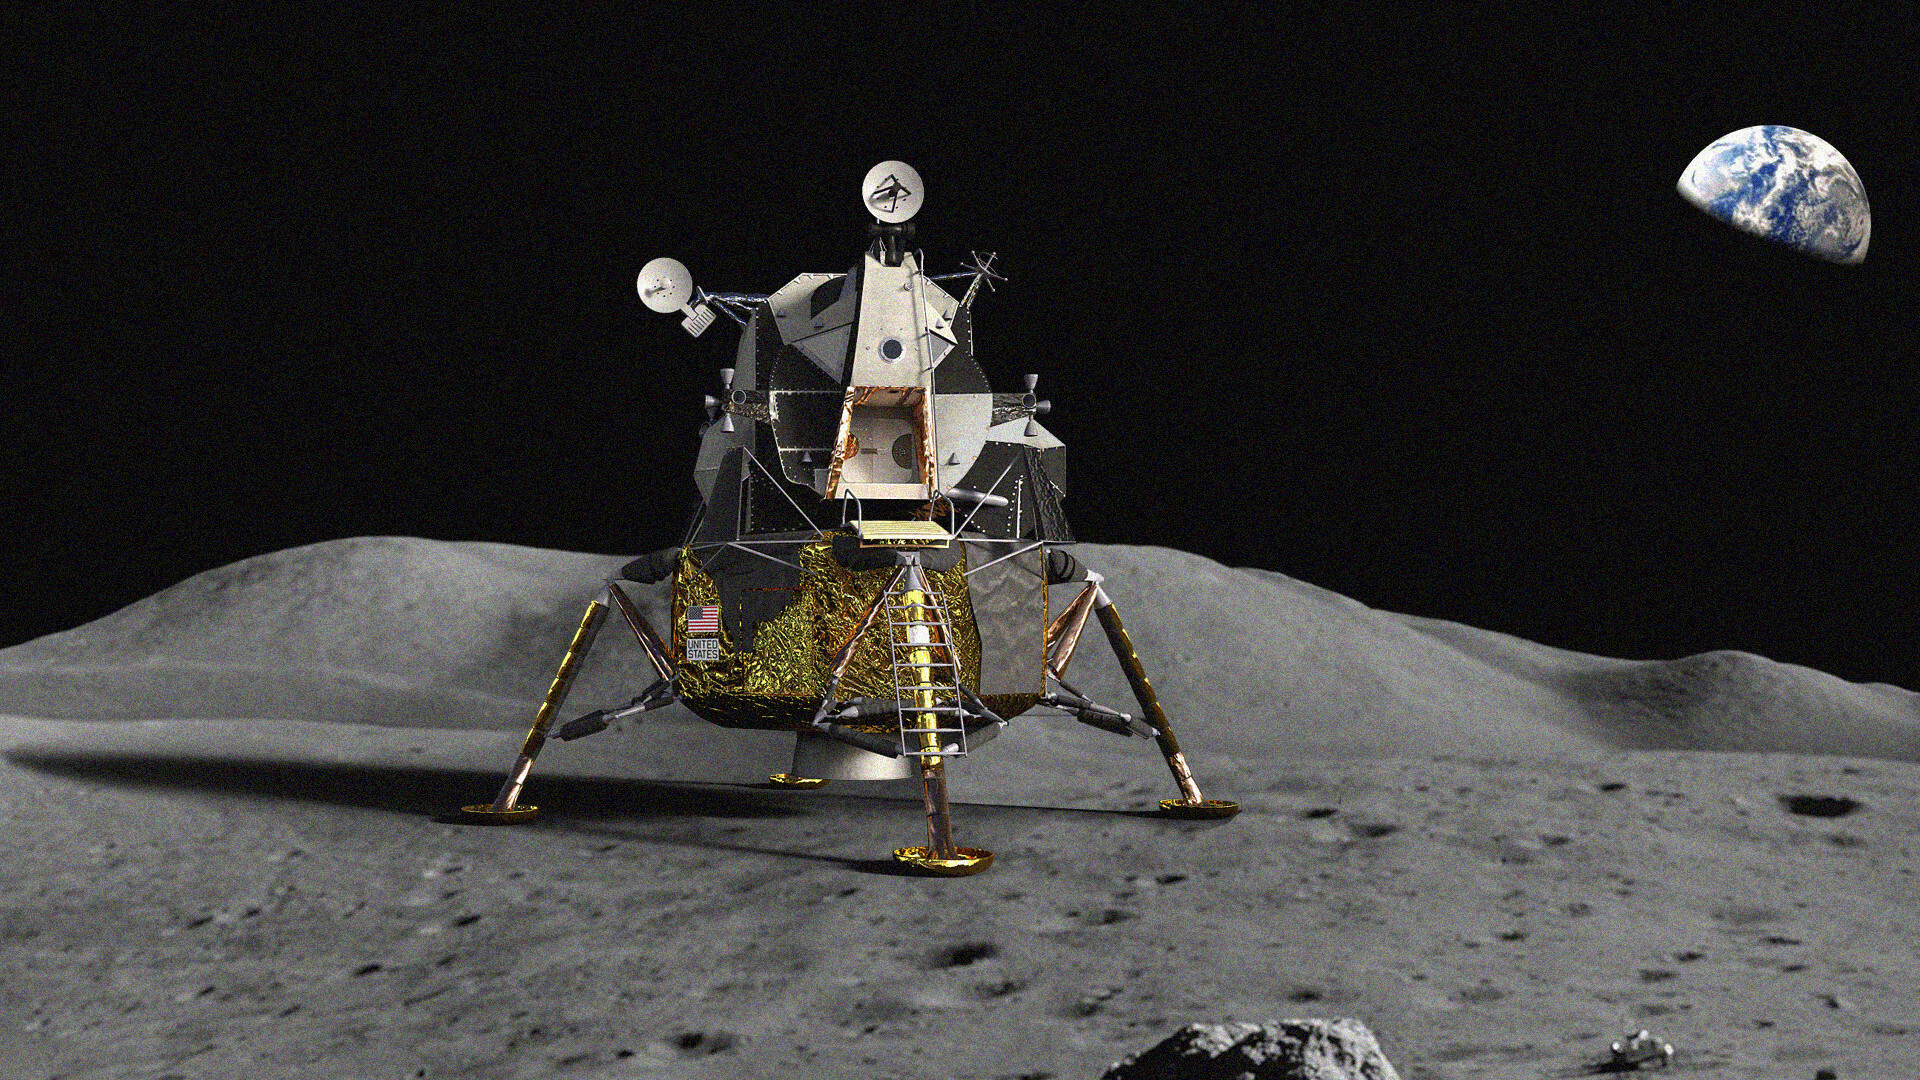 Apollo 11: Lunar Module, built by the Grumman Corporation in Bethpage, NY. 1920x1080 Full HD Wallpaper.